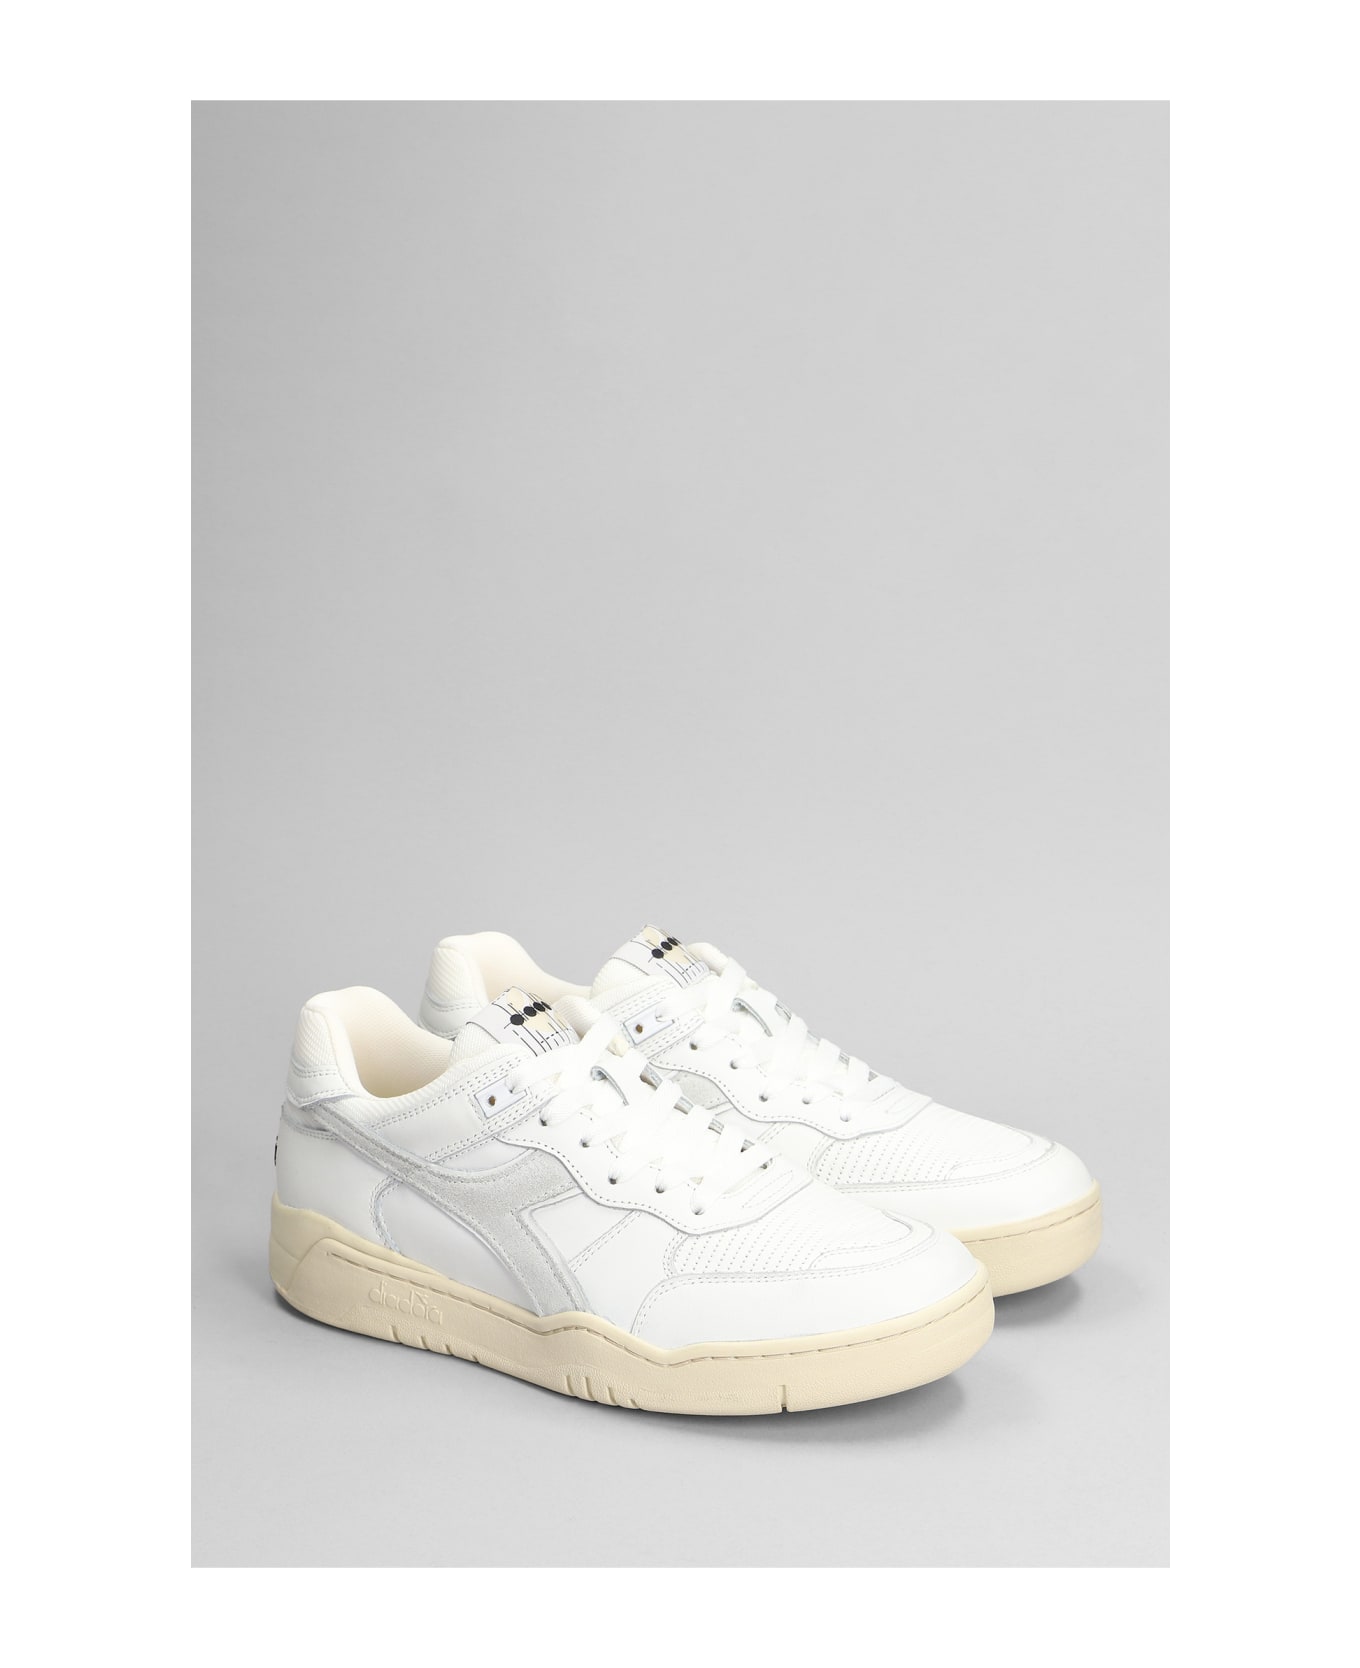 Diadora B.560 Used Sneakers In White Leather - white スニーカー